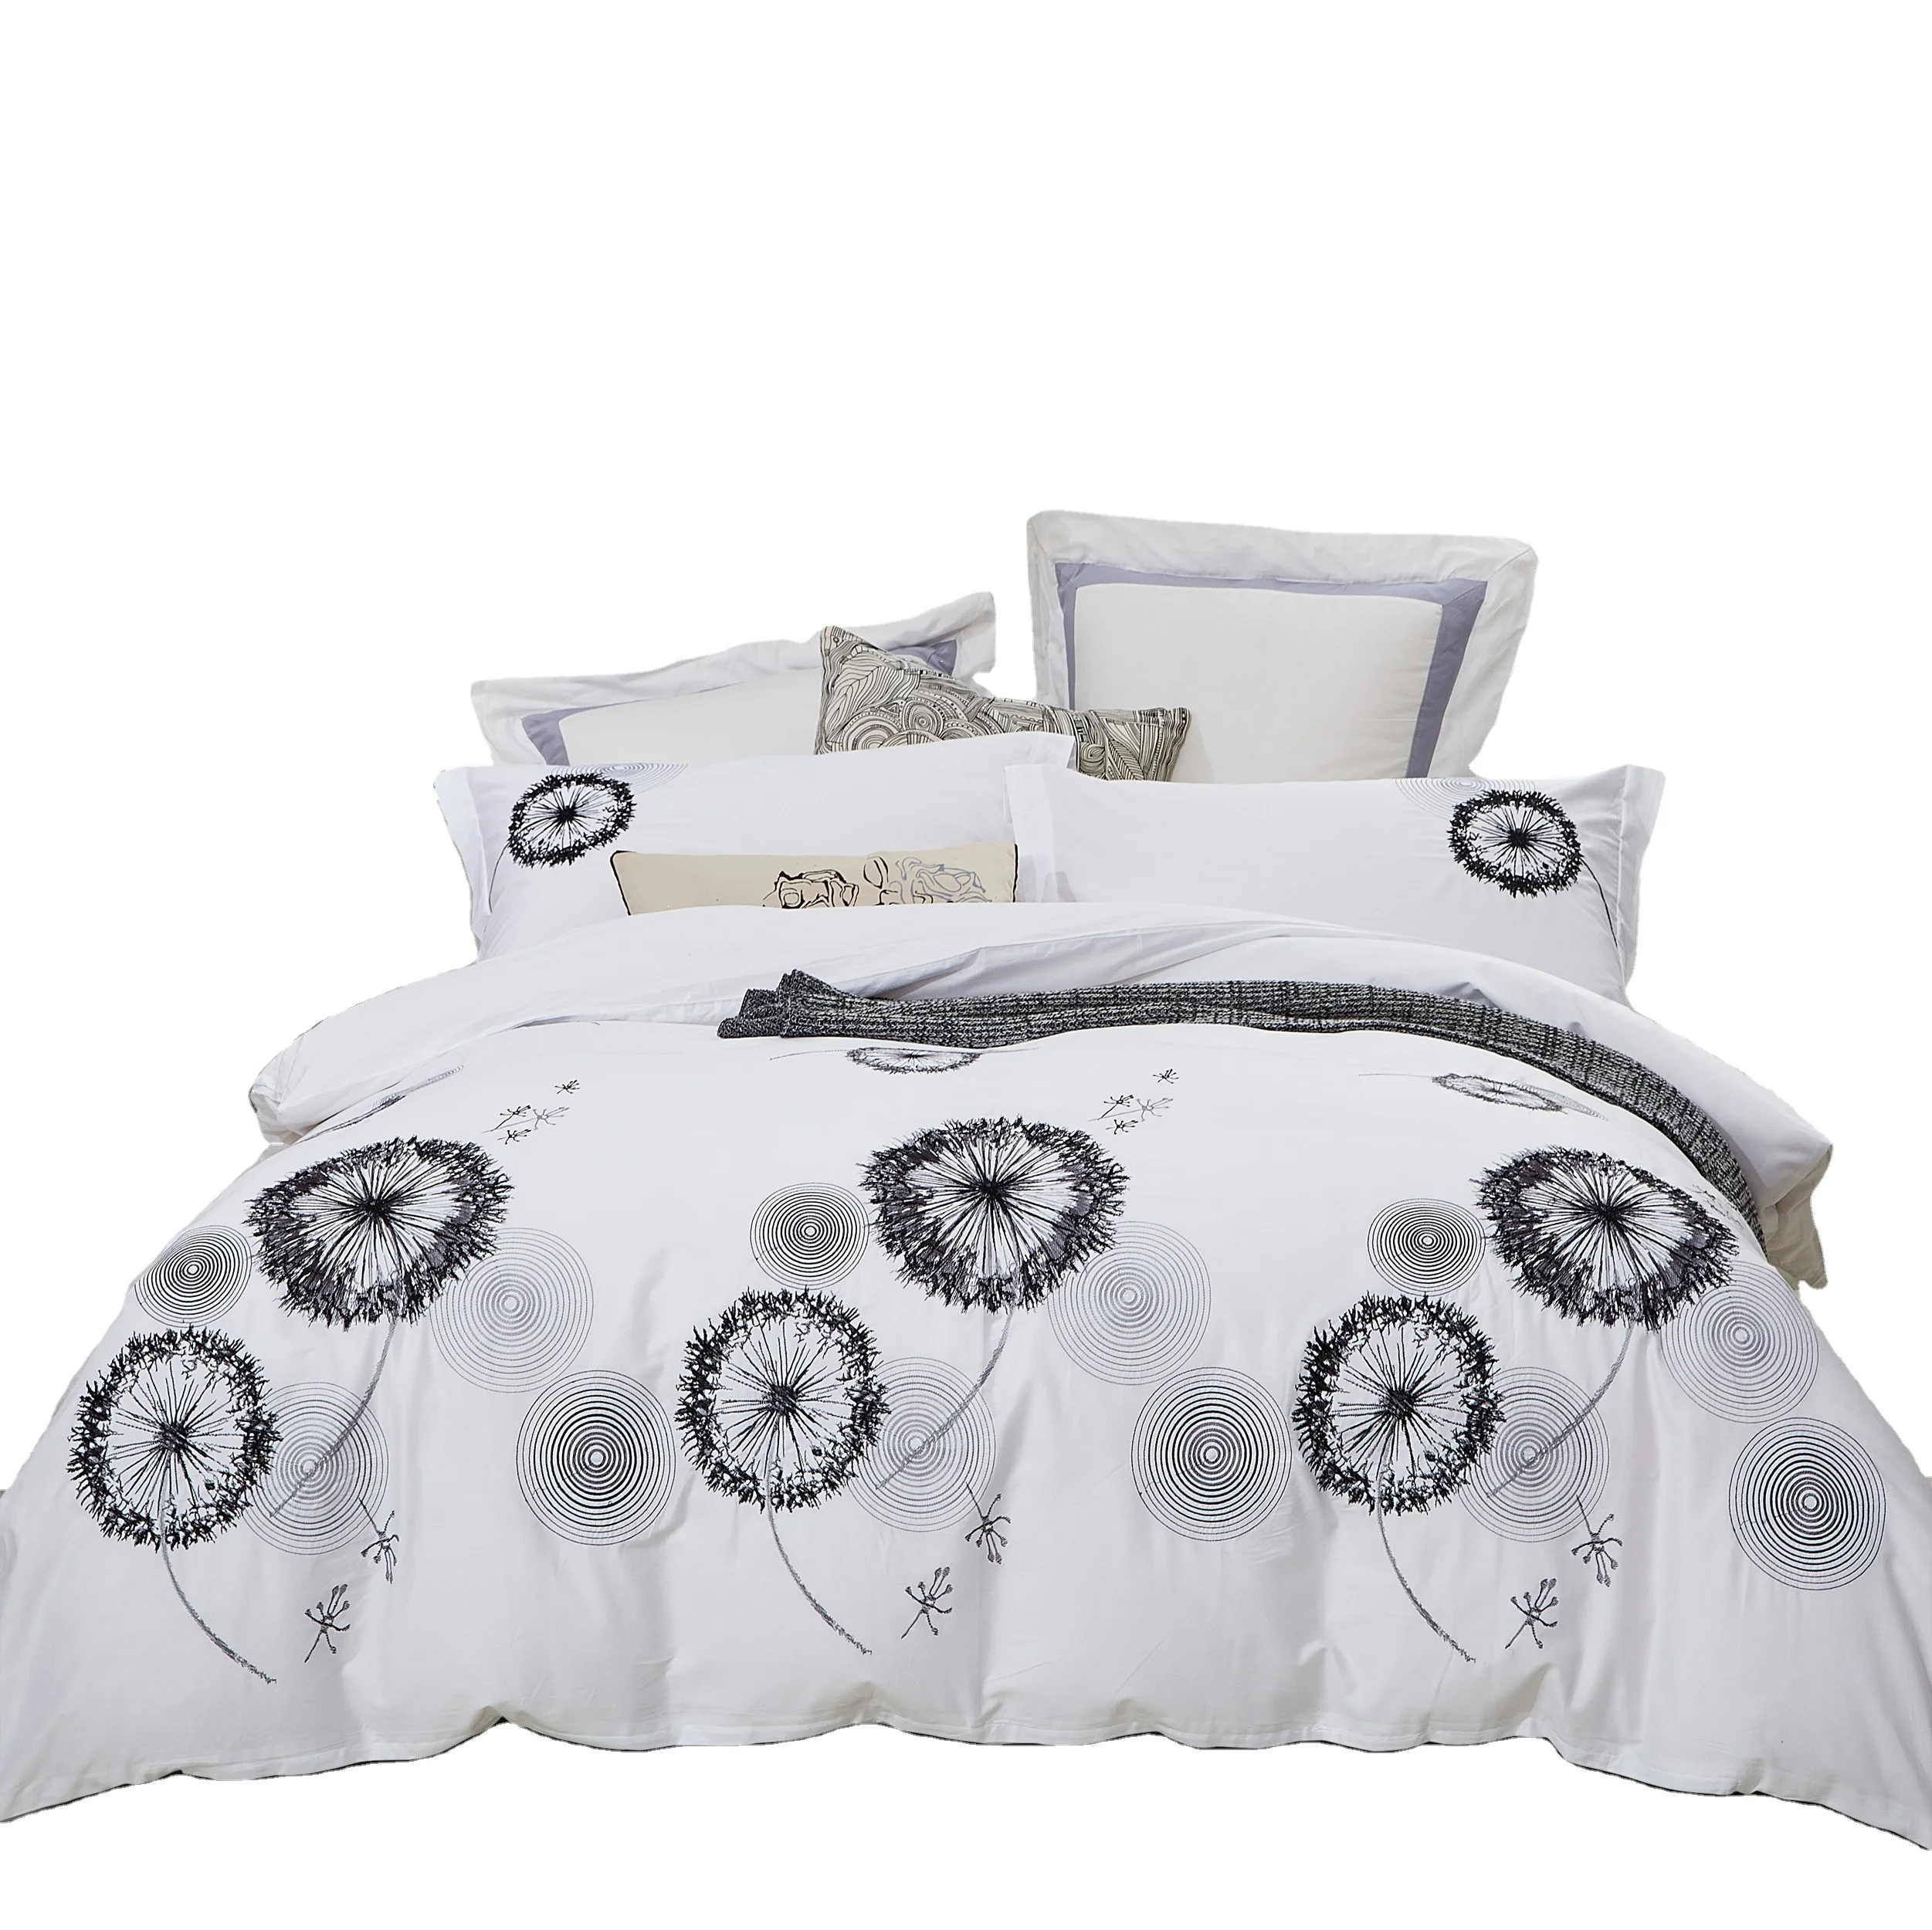 Elegant hotel and home use cotton bed sheet bedding set white bed linen